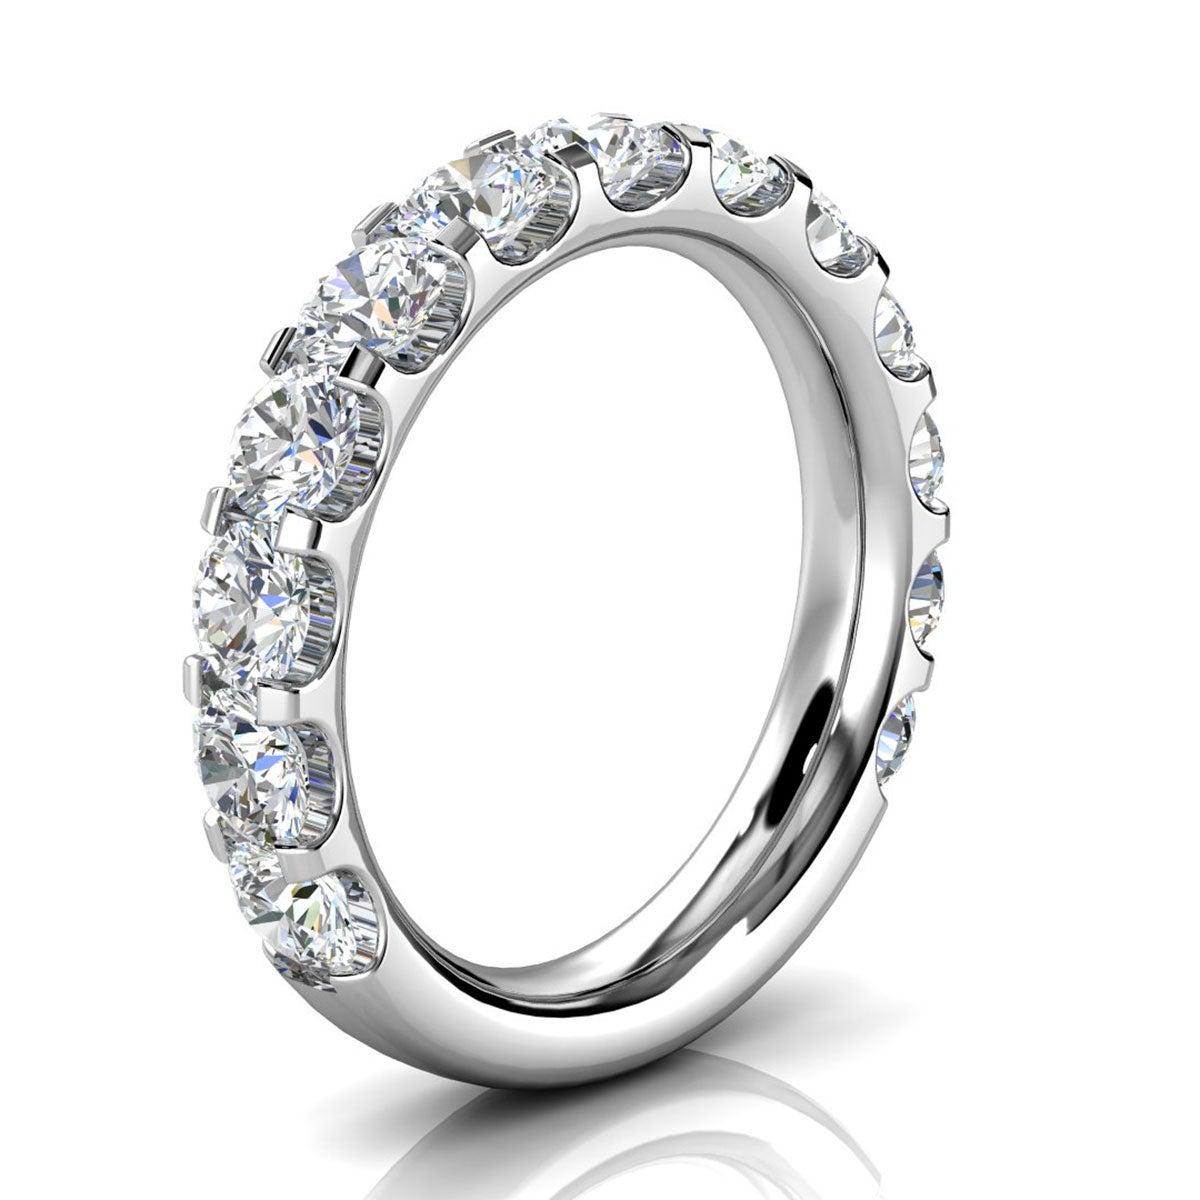 For Sale:  18k White Gold Carole Micro-Prong Diamond Ring '2 Ct. Tw' 2